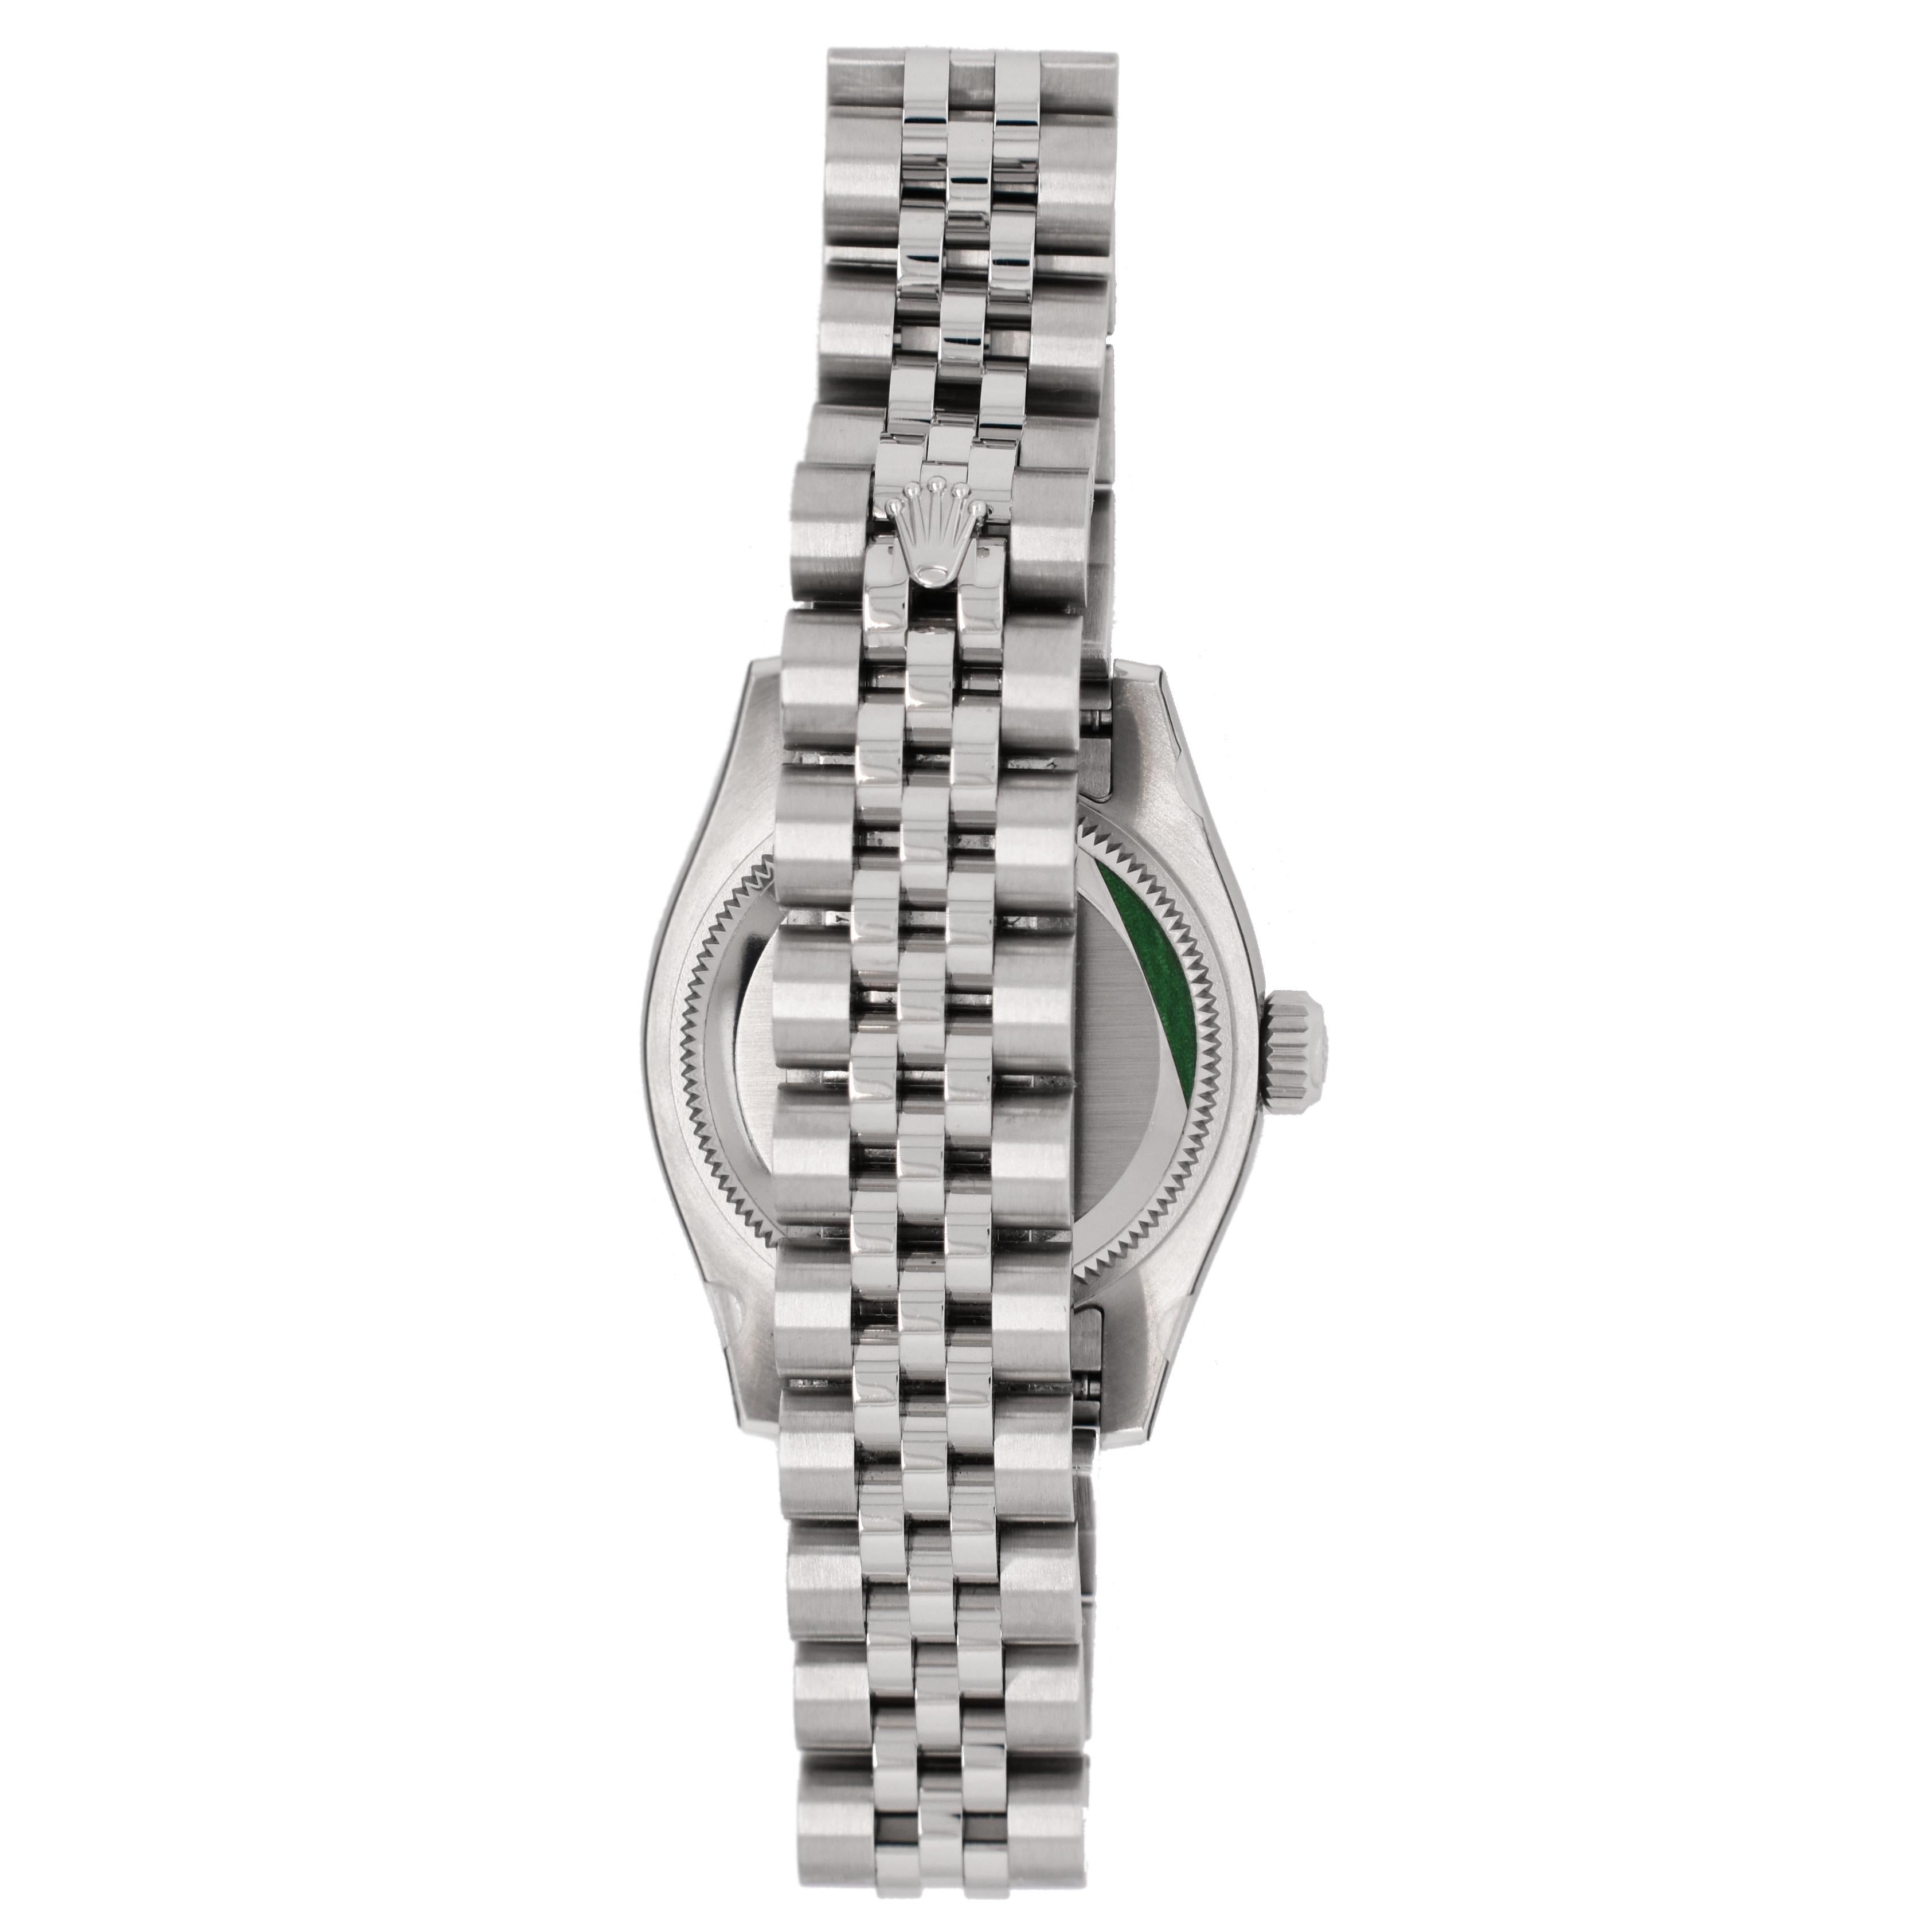 This is a brand new Rolex ladies Datejust reference 179384 with a factory Rolex Mother of Pearl diamond dial and a factory Rolex diamond bezel. The watch case and jubilee bracelet are stainless steel with an 18 karat white gold bezel. This timeless,